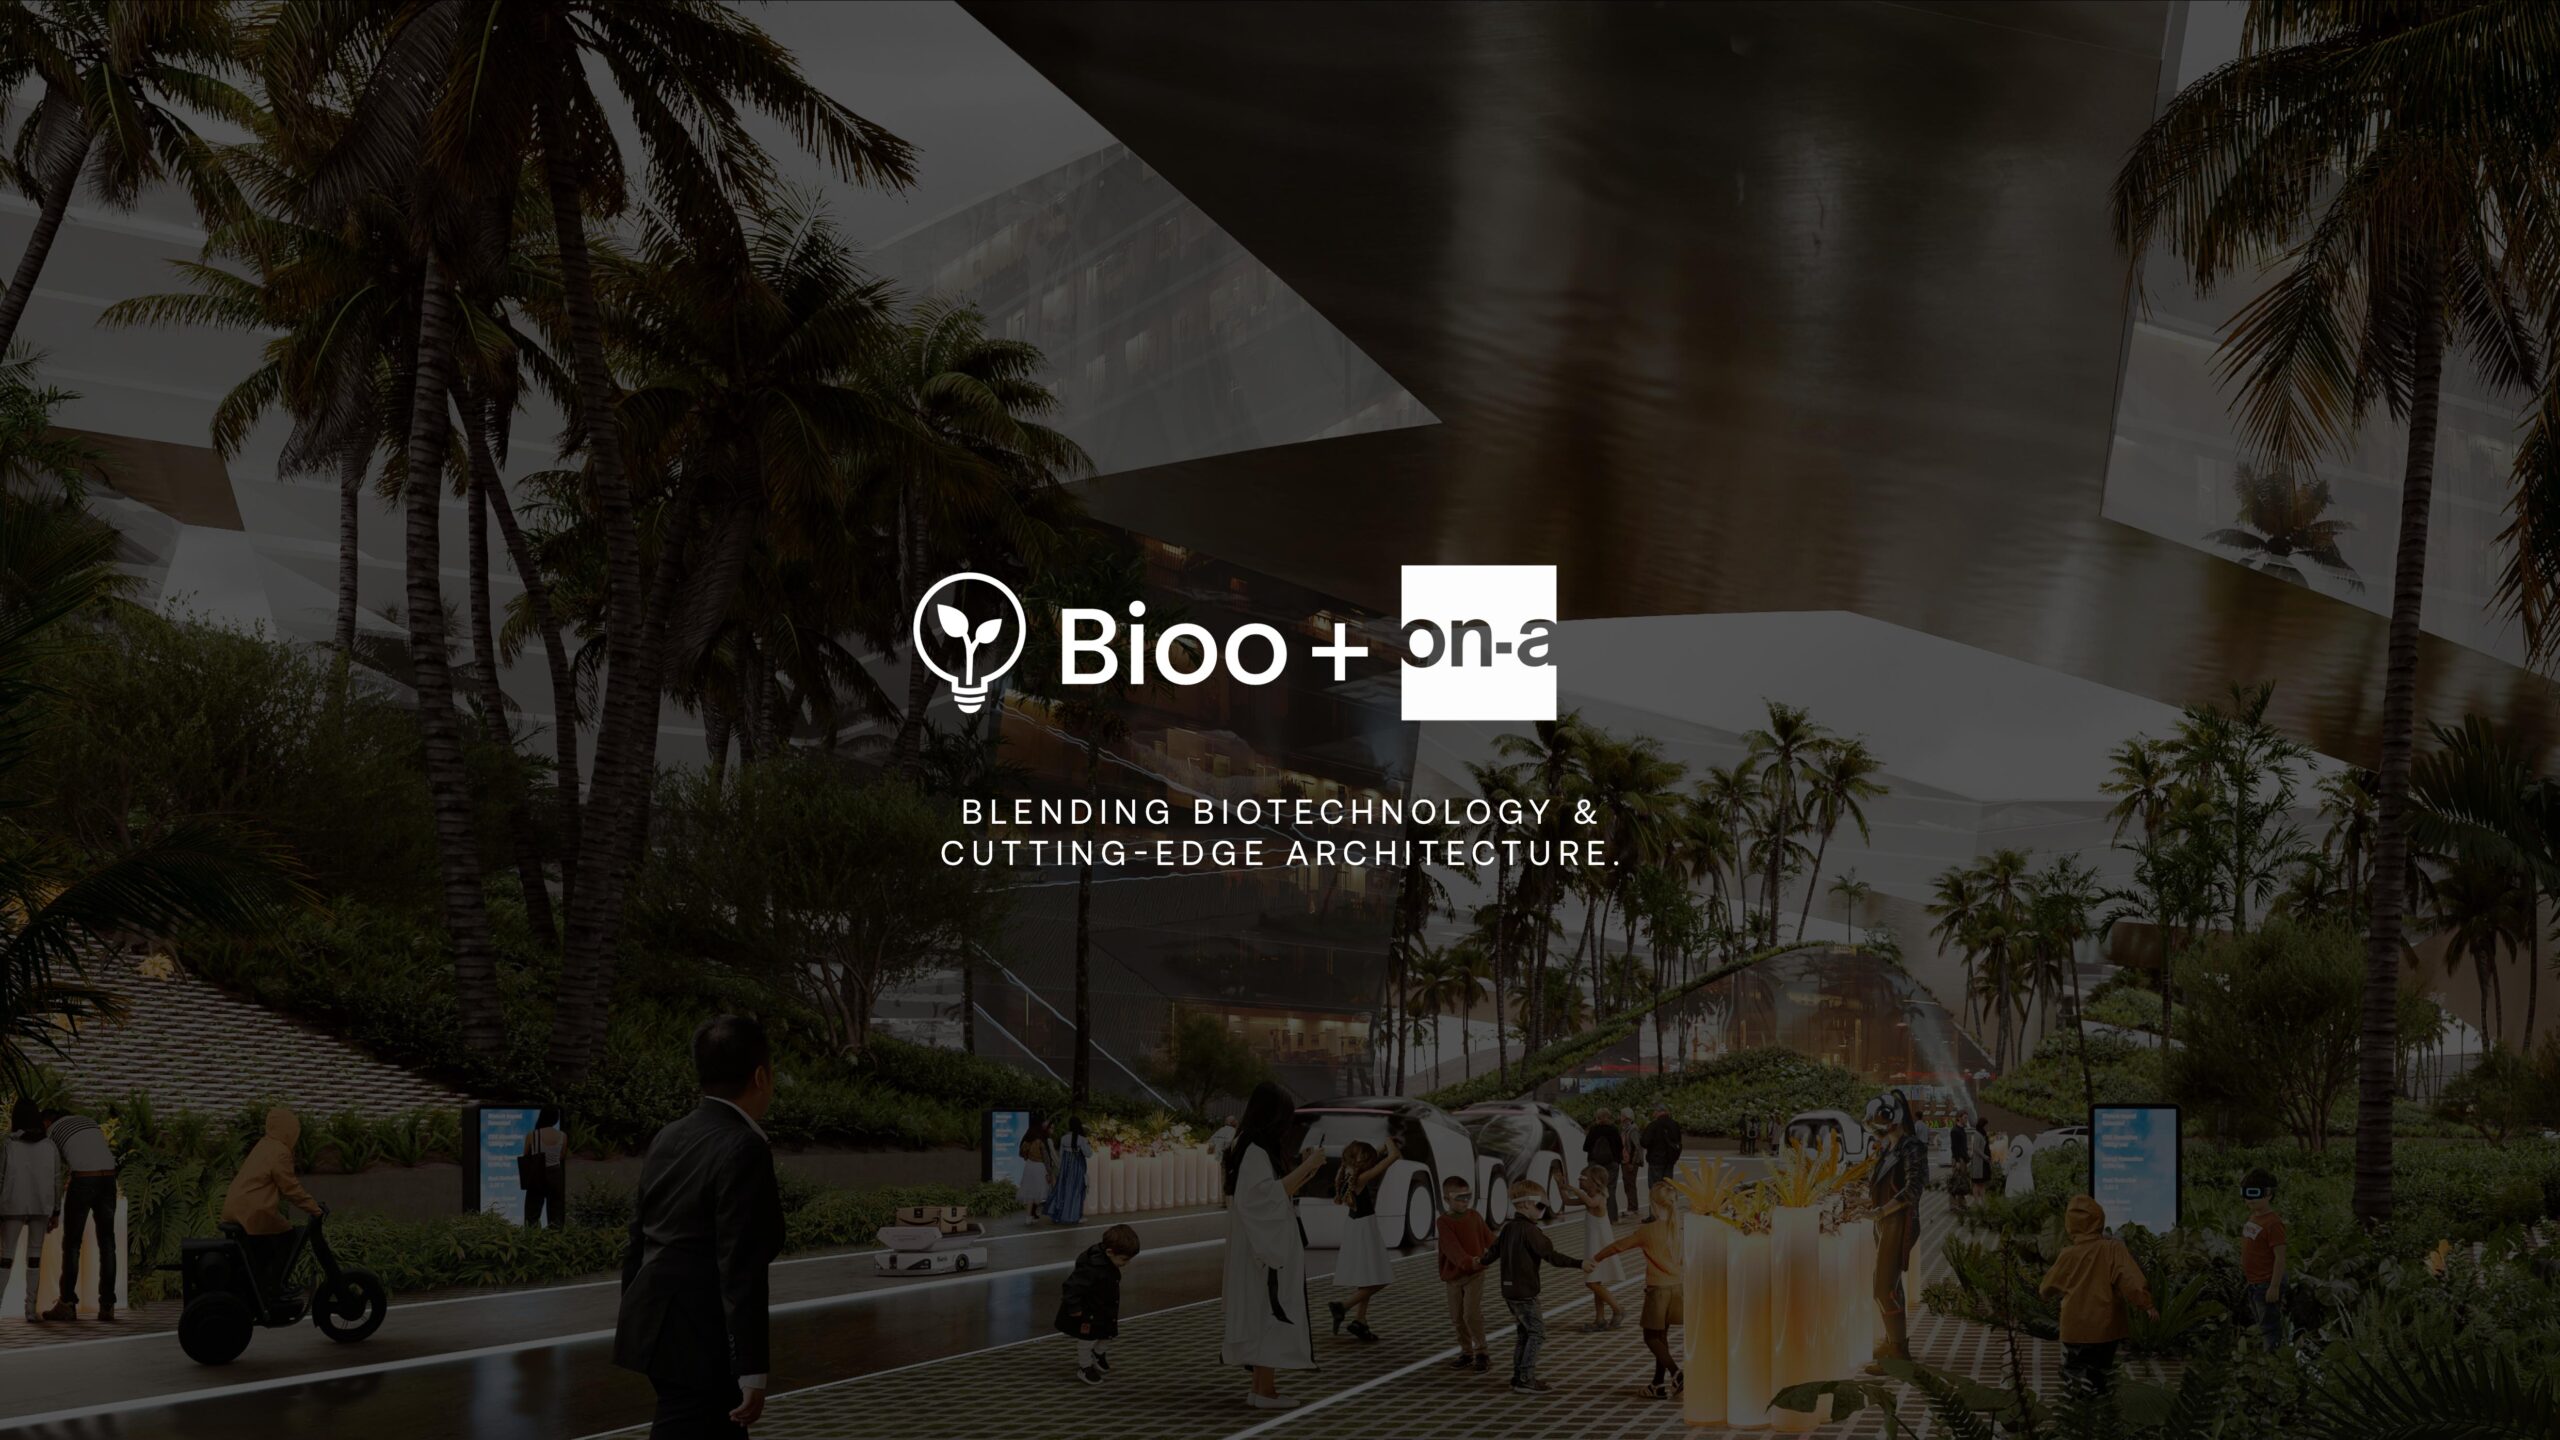 Biotech City's ambitious sustainable vision is made possible through collaboration with BIOO, a leading biotechnology company at the convergence of nature and green technology.